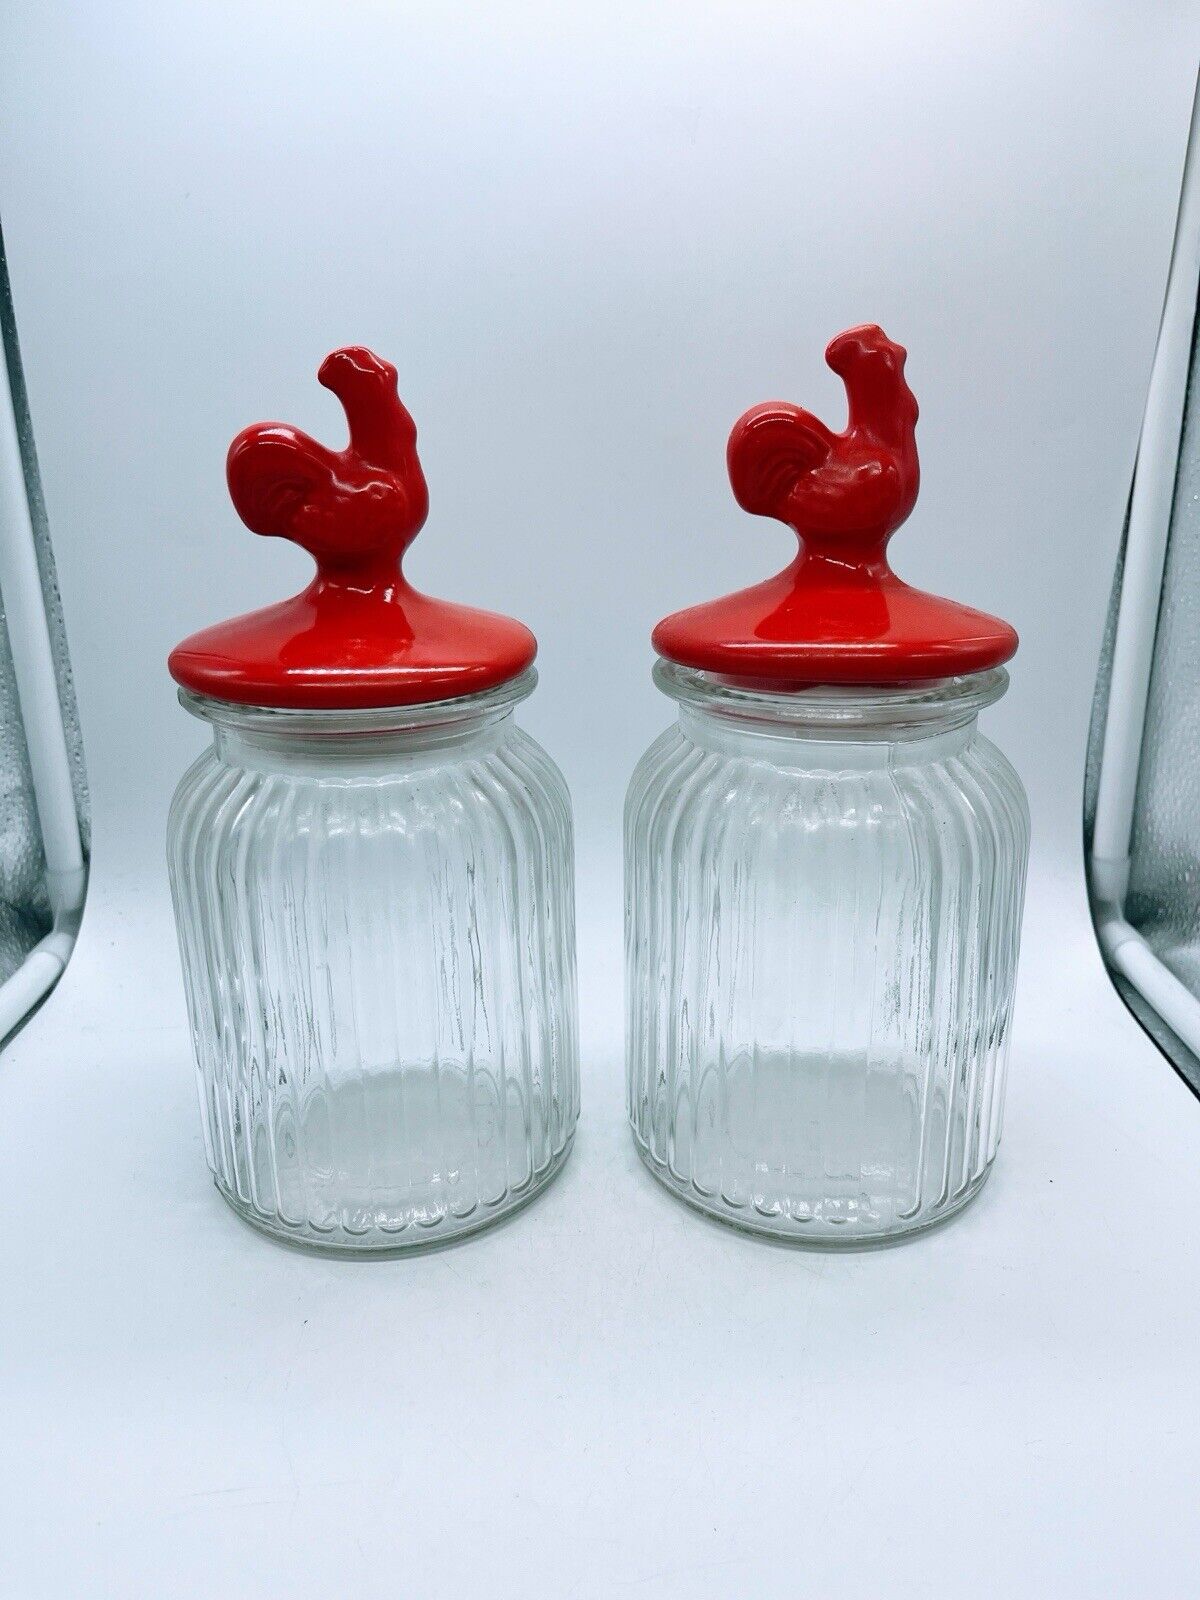 Pair of Red Rooster Canisters